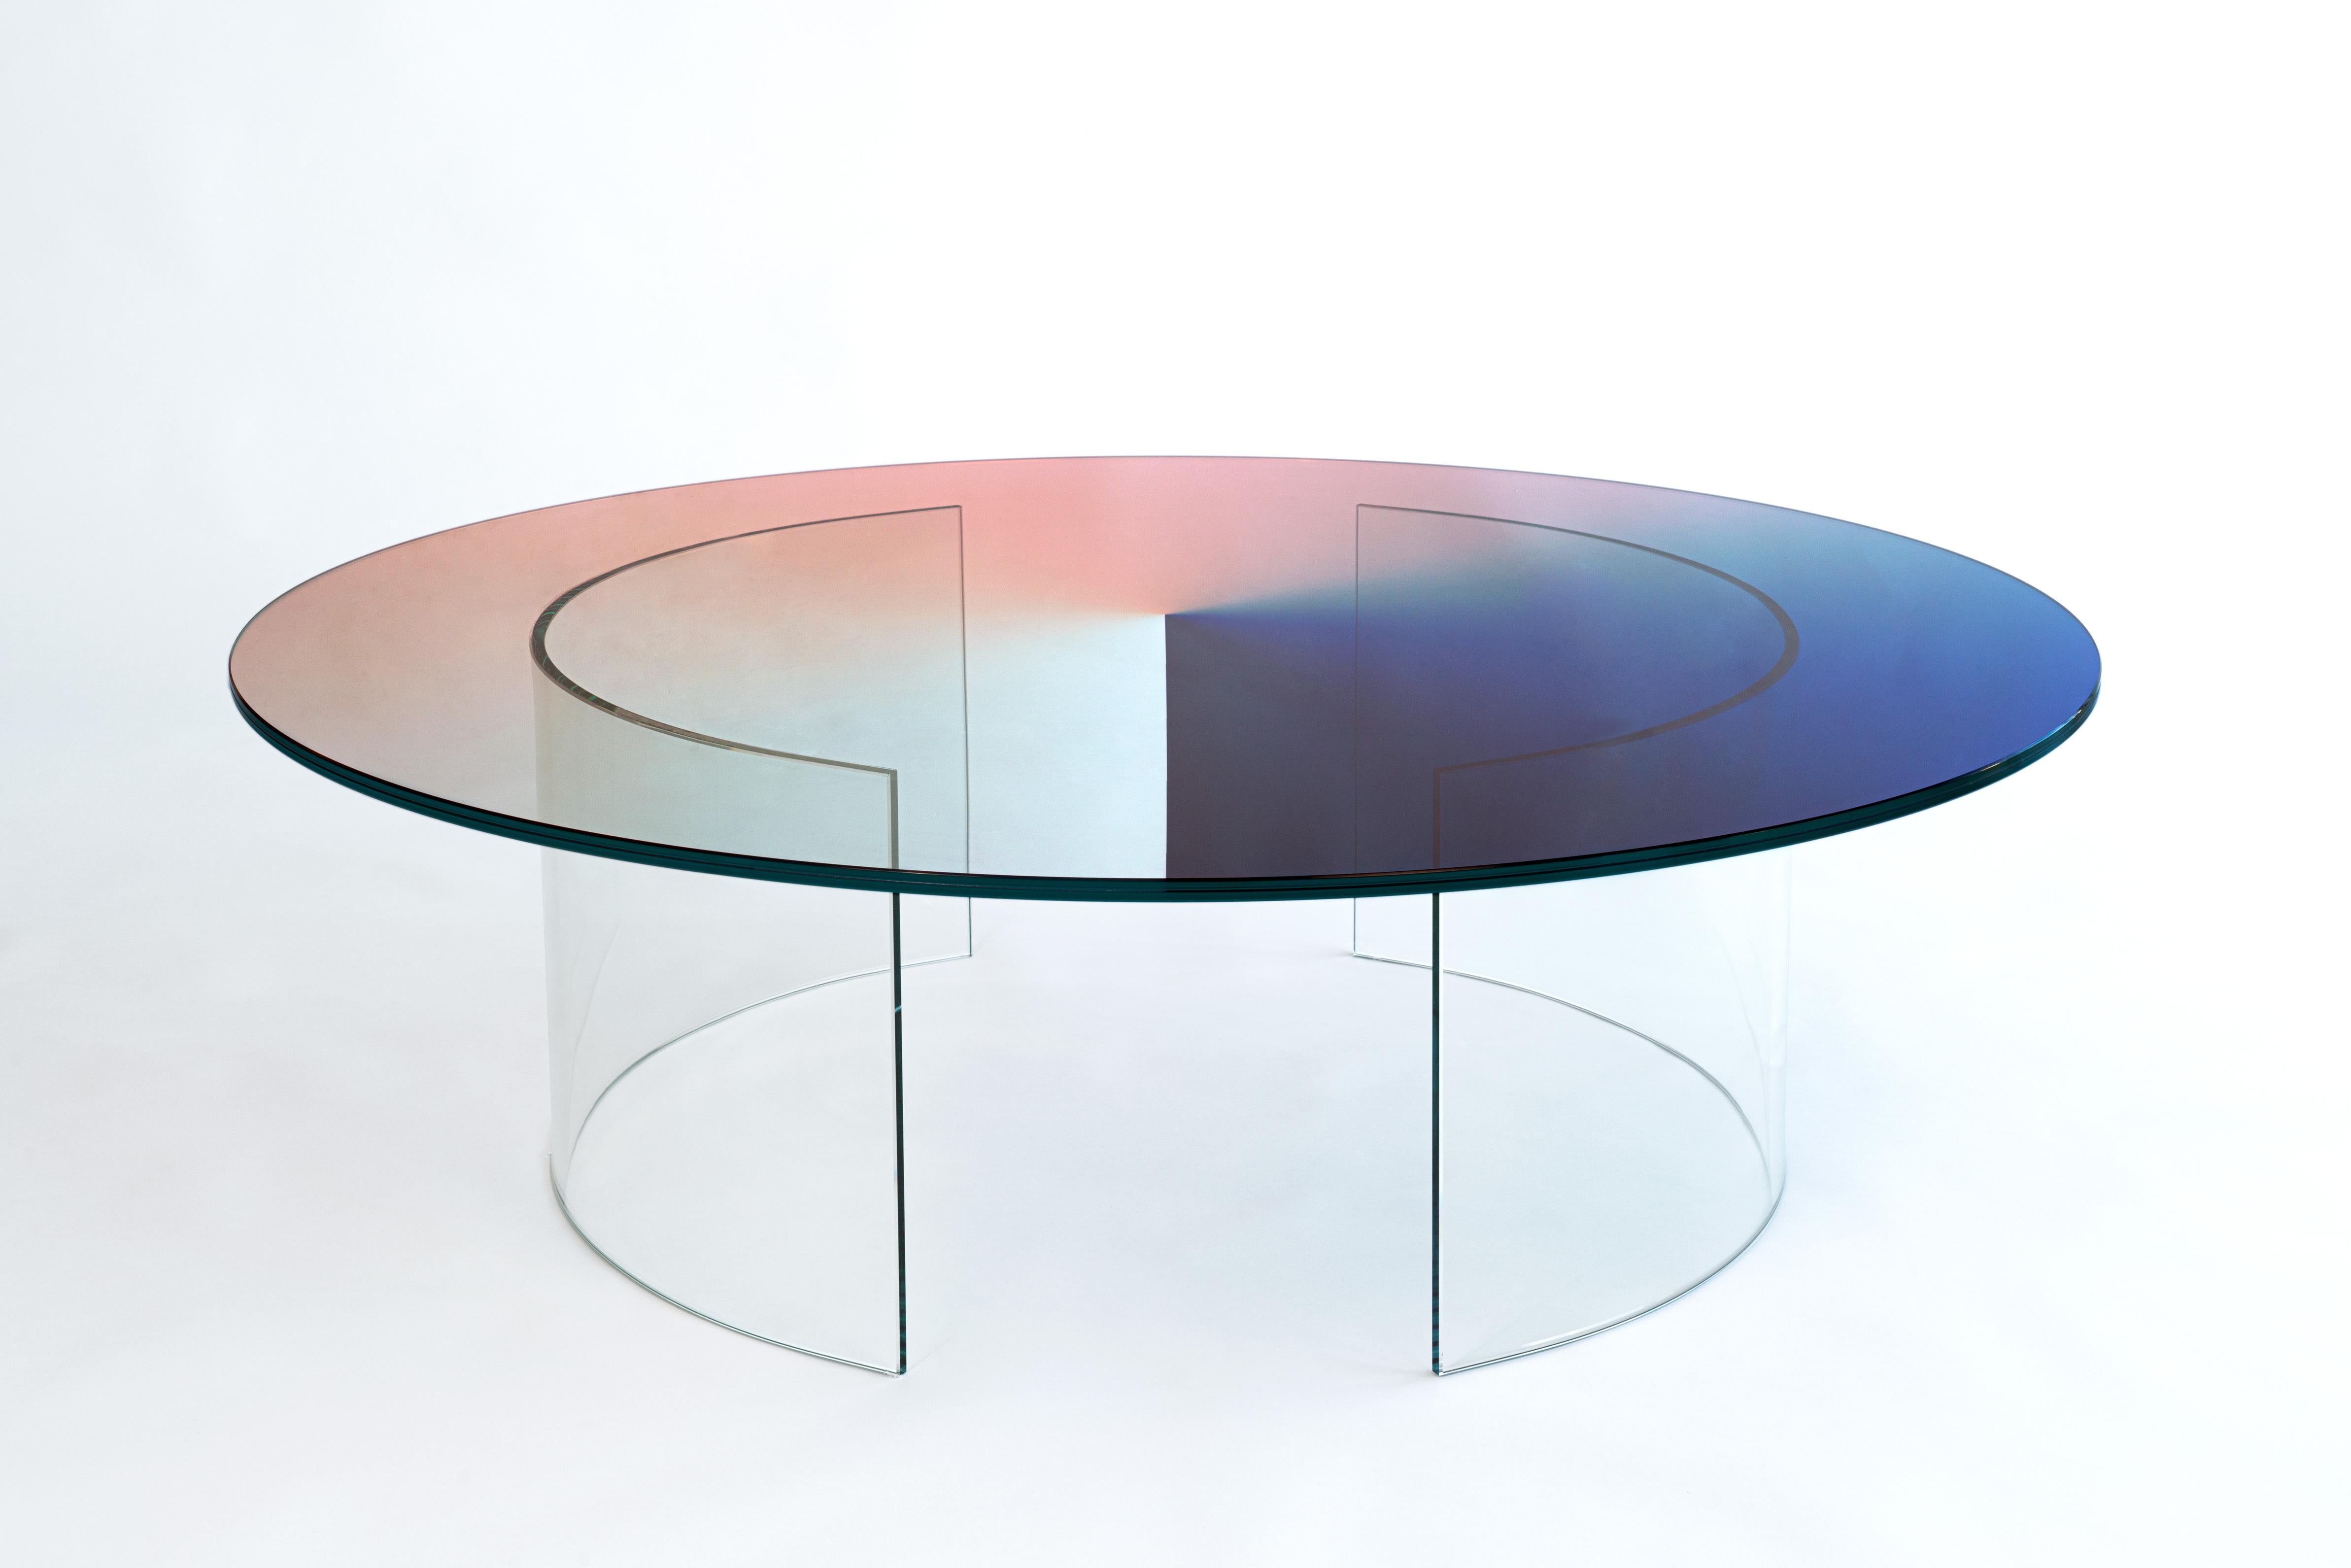 The Color Dial Curved table features a fully transparent glass top with bespoke curved legs that are attached to the top. The table is a sculptural feature that projects colour onto its surroundings and reflects intriguing patterns of light within